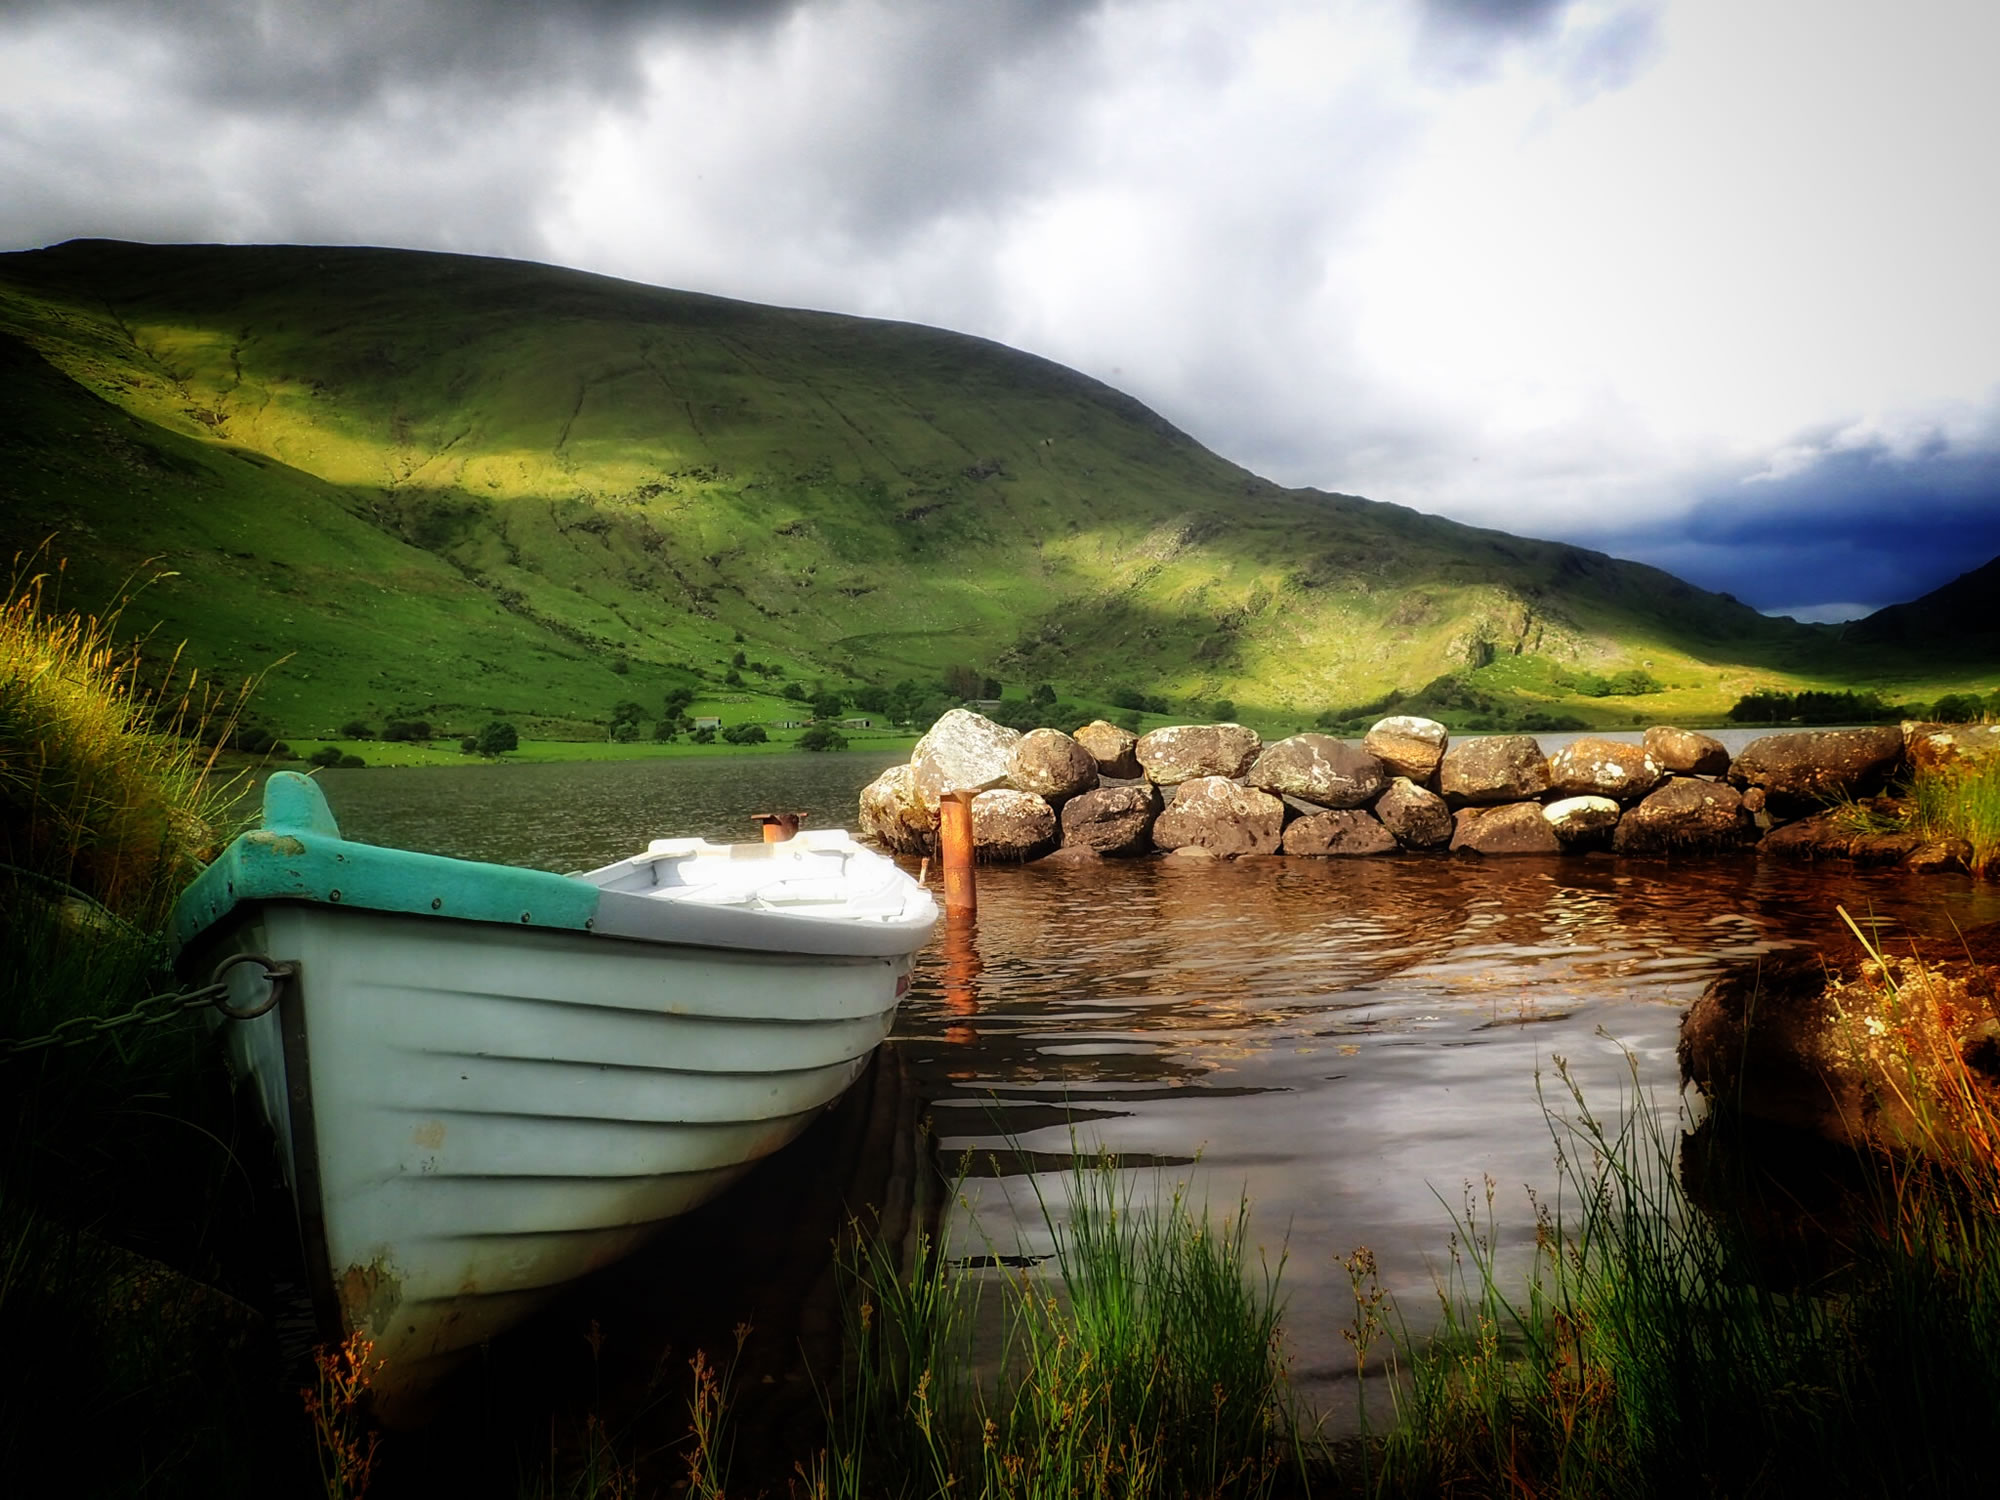 Lough Brin tranquillity, Co Kerry, Ireland. Anthony Reed